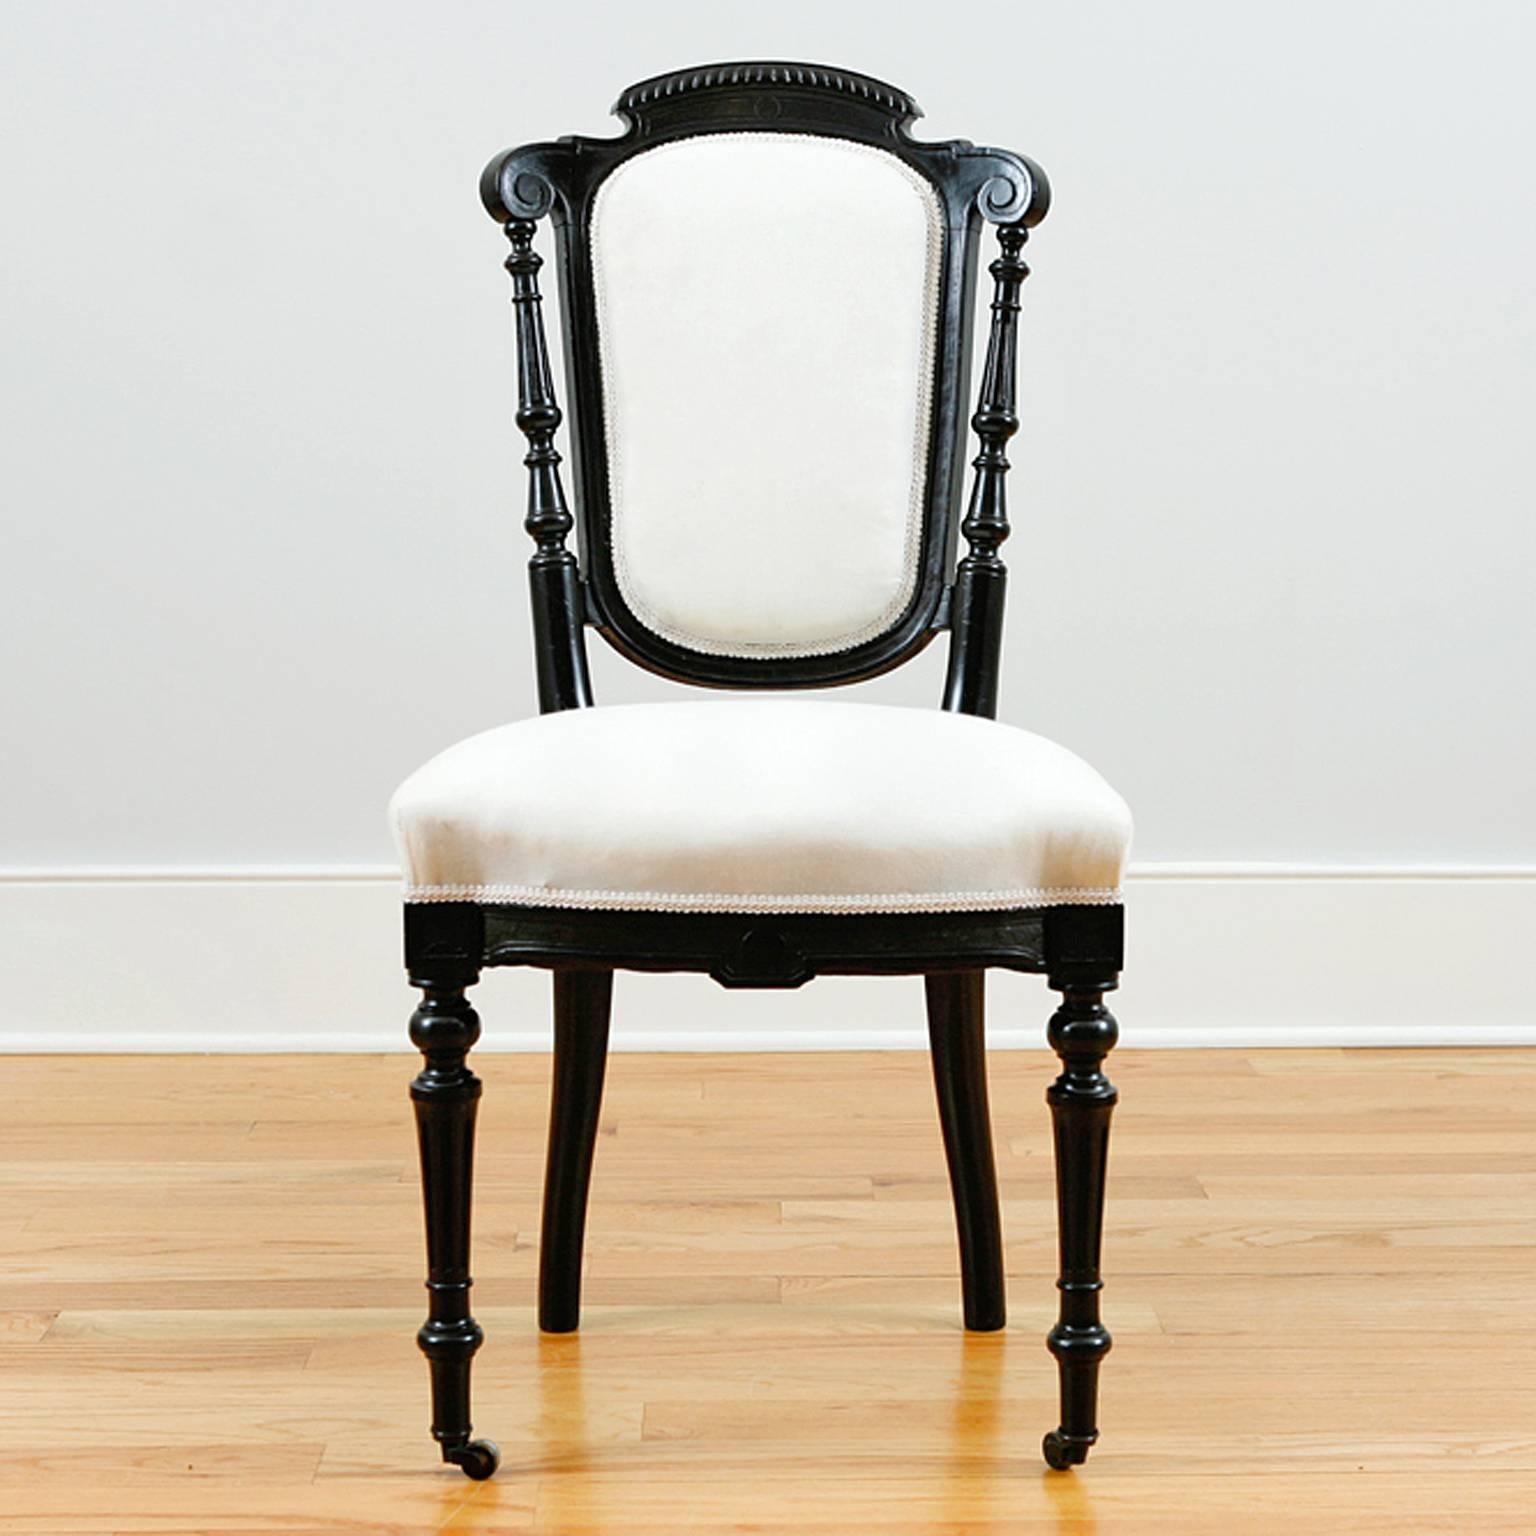 A handsome and very comfortable set of four French dining chairs with upholstered back and seat. Ebonized frame has carved crest and apron, turned front legs with casters and turned back spindles. From the reign of Napoleon III, France, circa